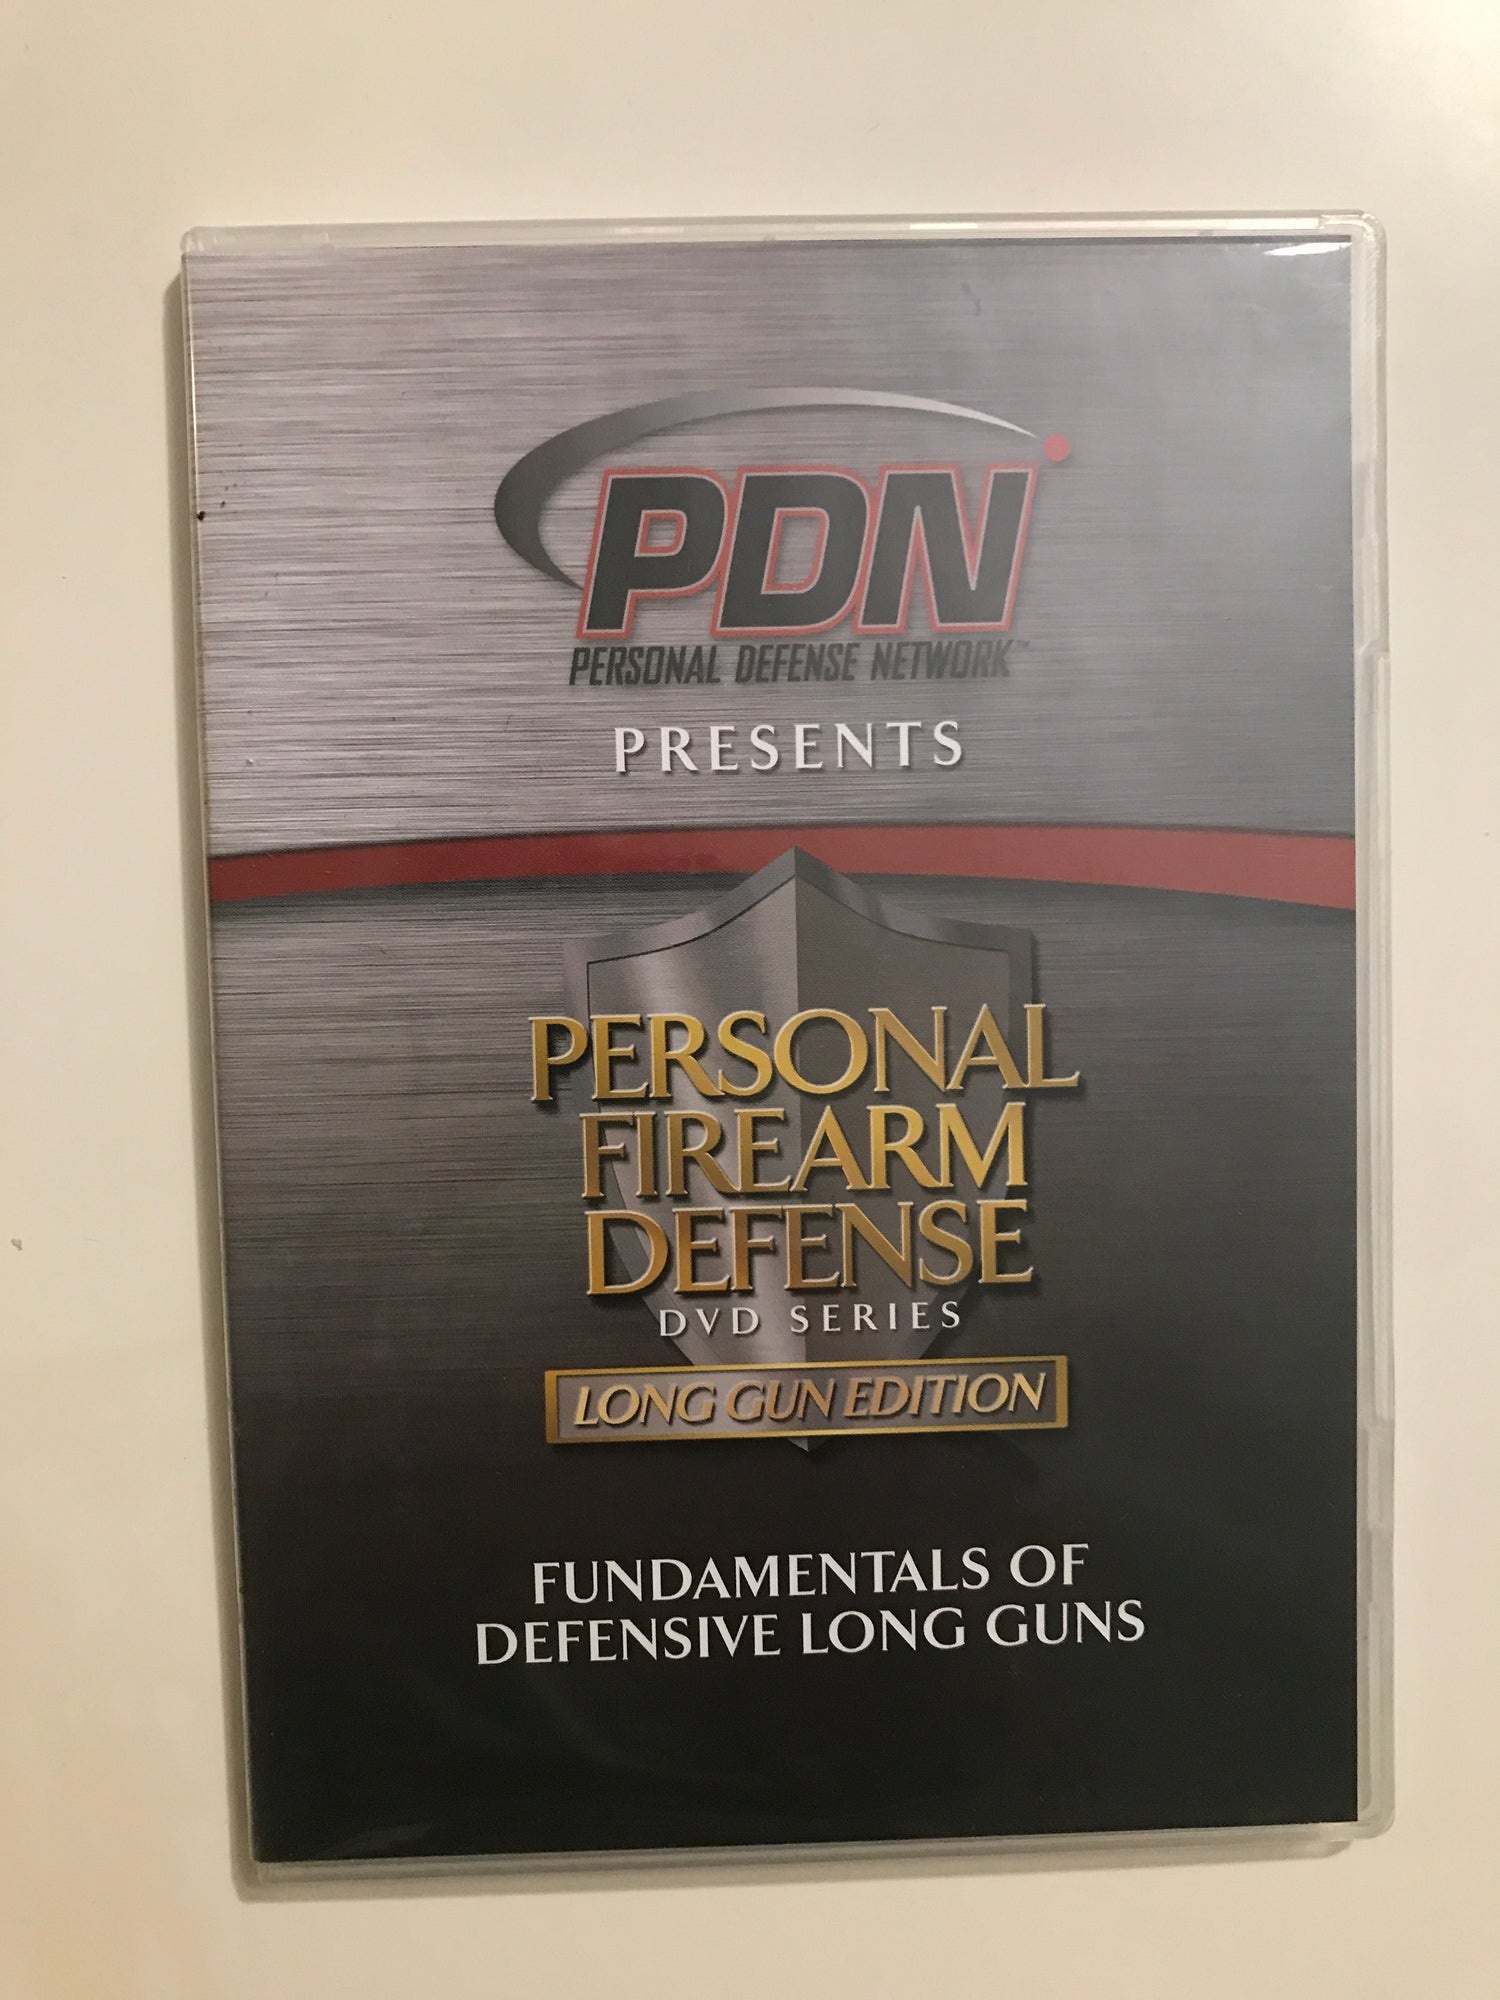 Personal Firearm Defense: Fundamentals of Defensive Long Guns DVD by Rob Pincus (Preowned) - Budovideos